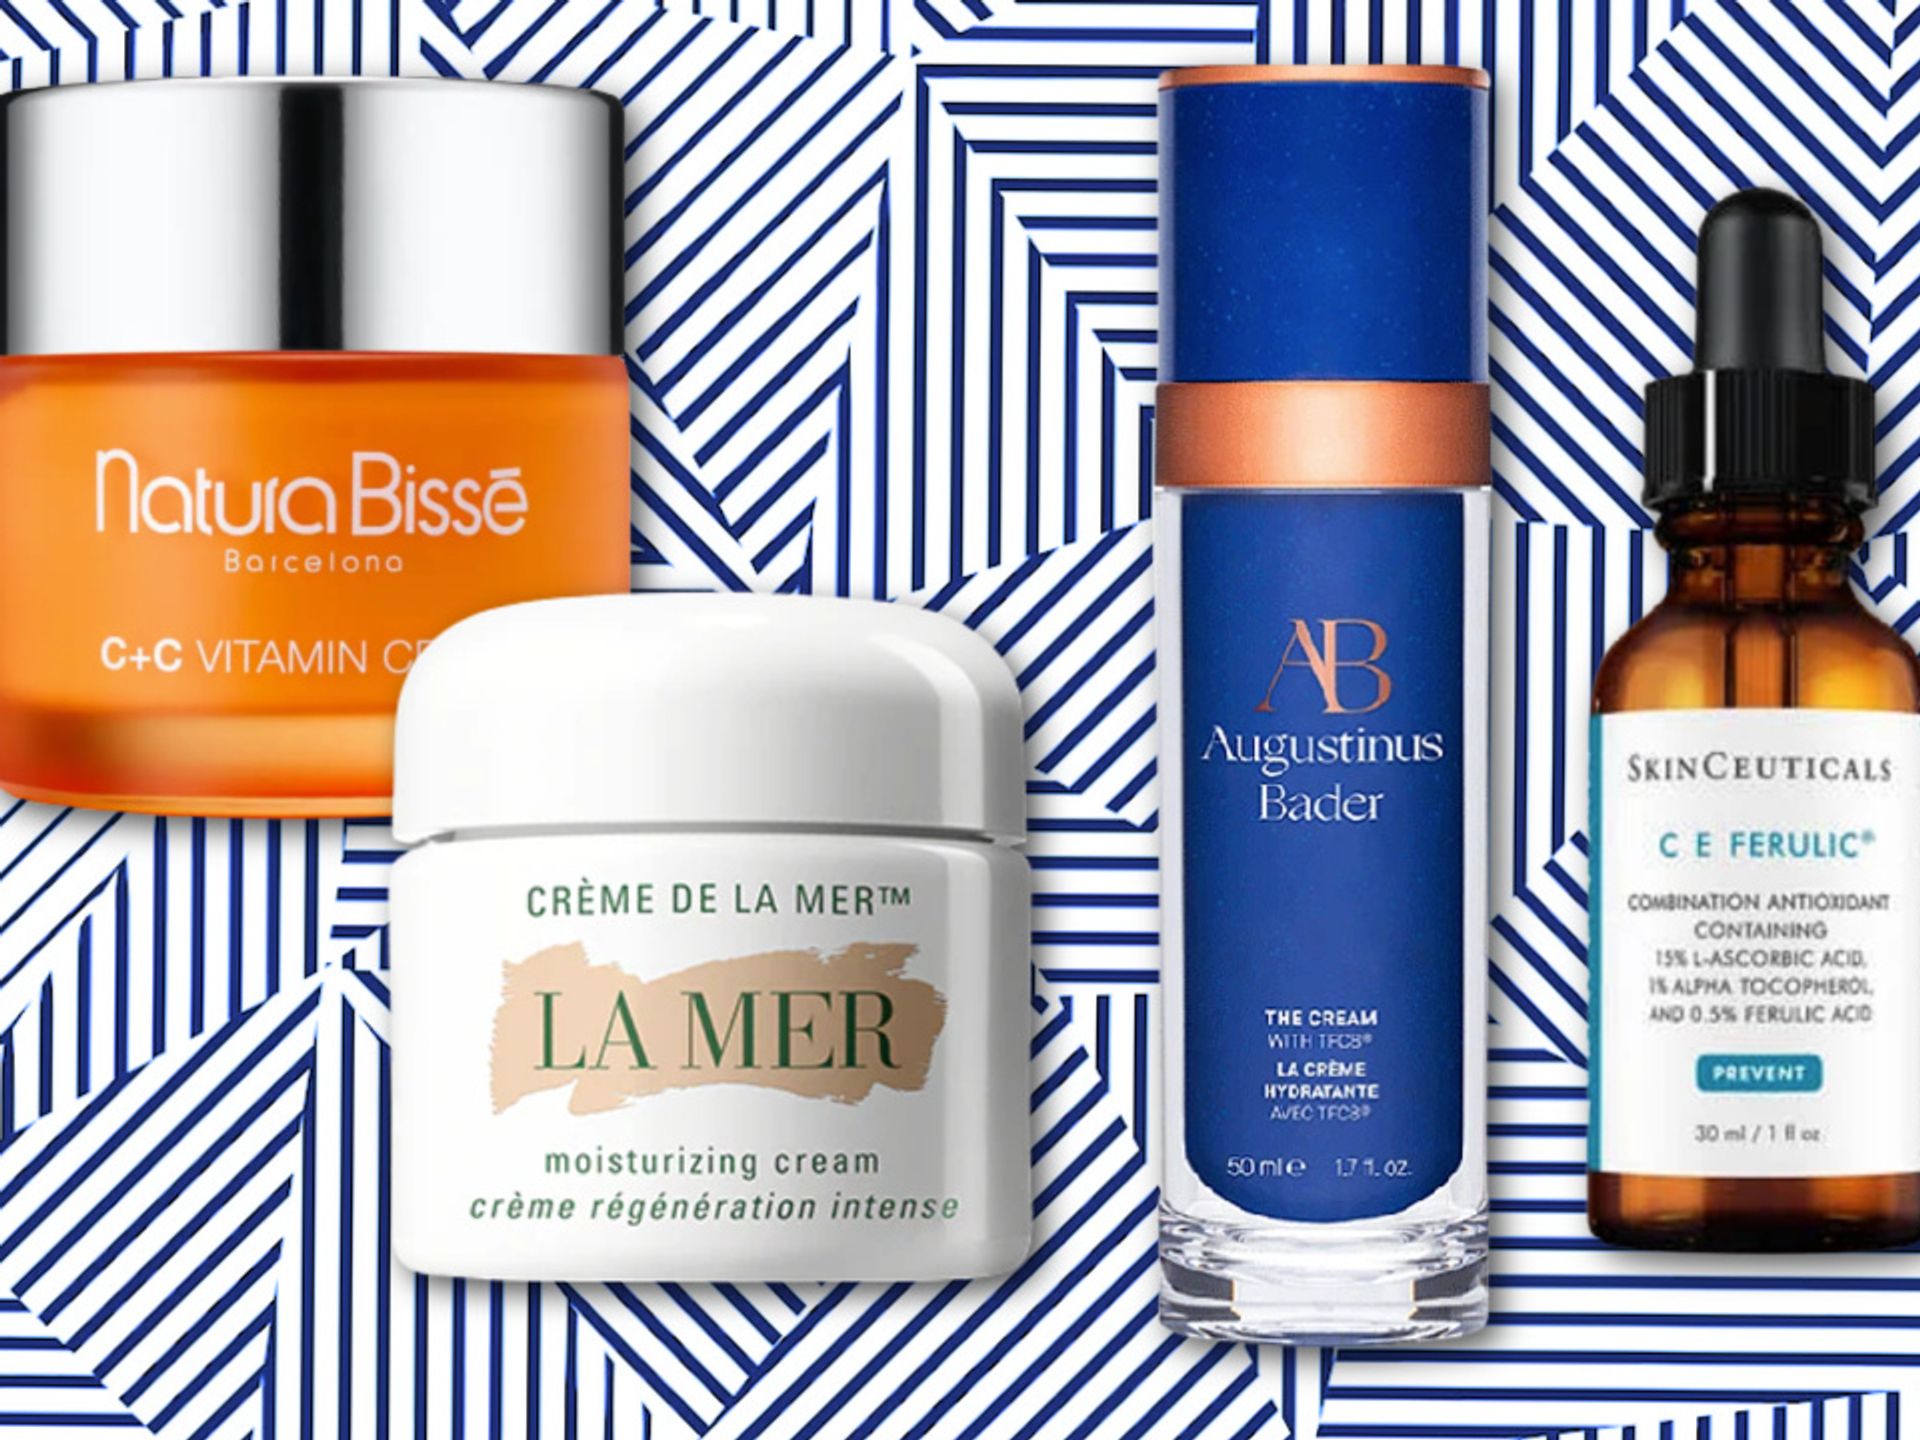 15 Luxury Skincare Items On Sale at Gilt 2021: Dior, Chanel, More